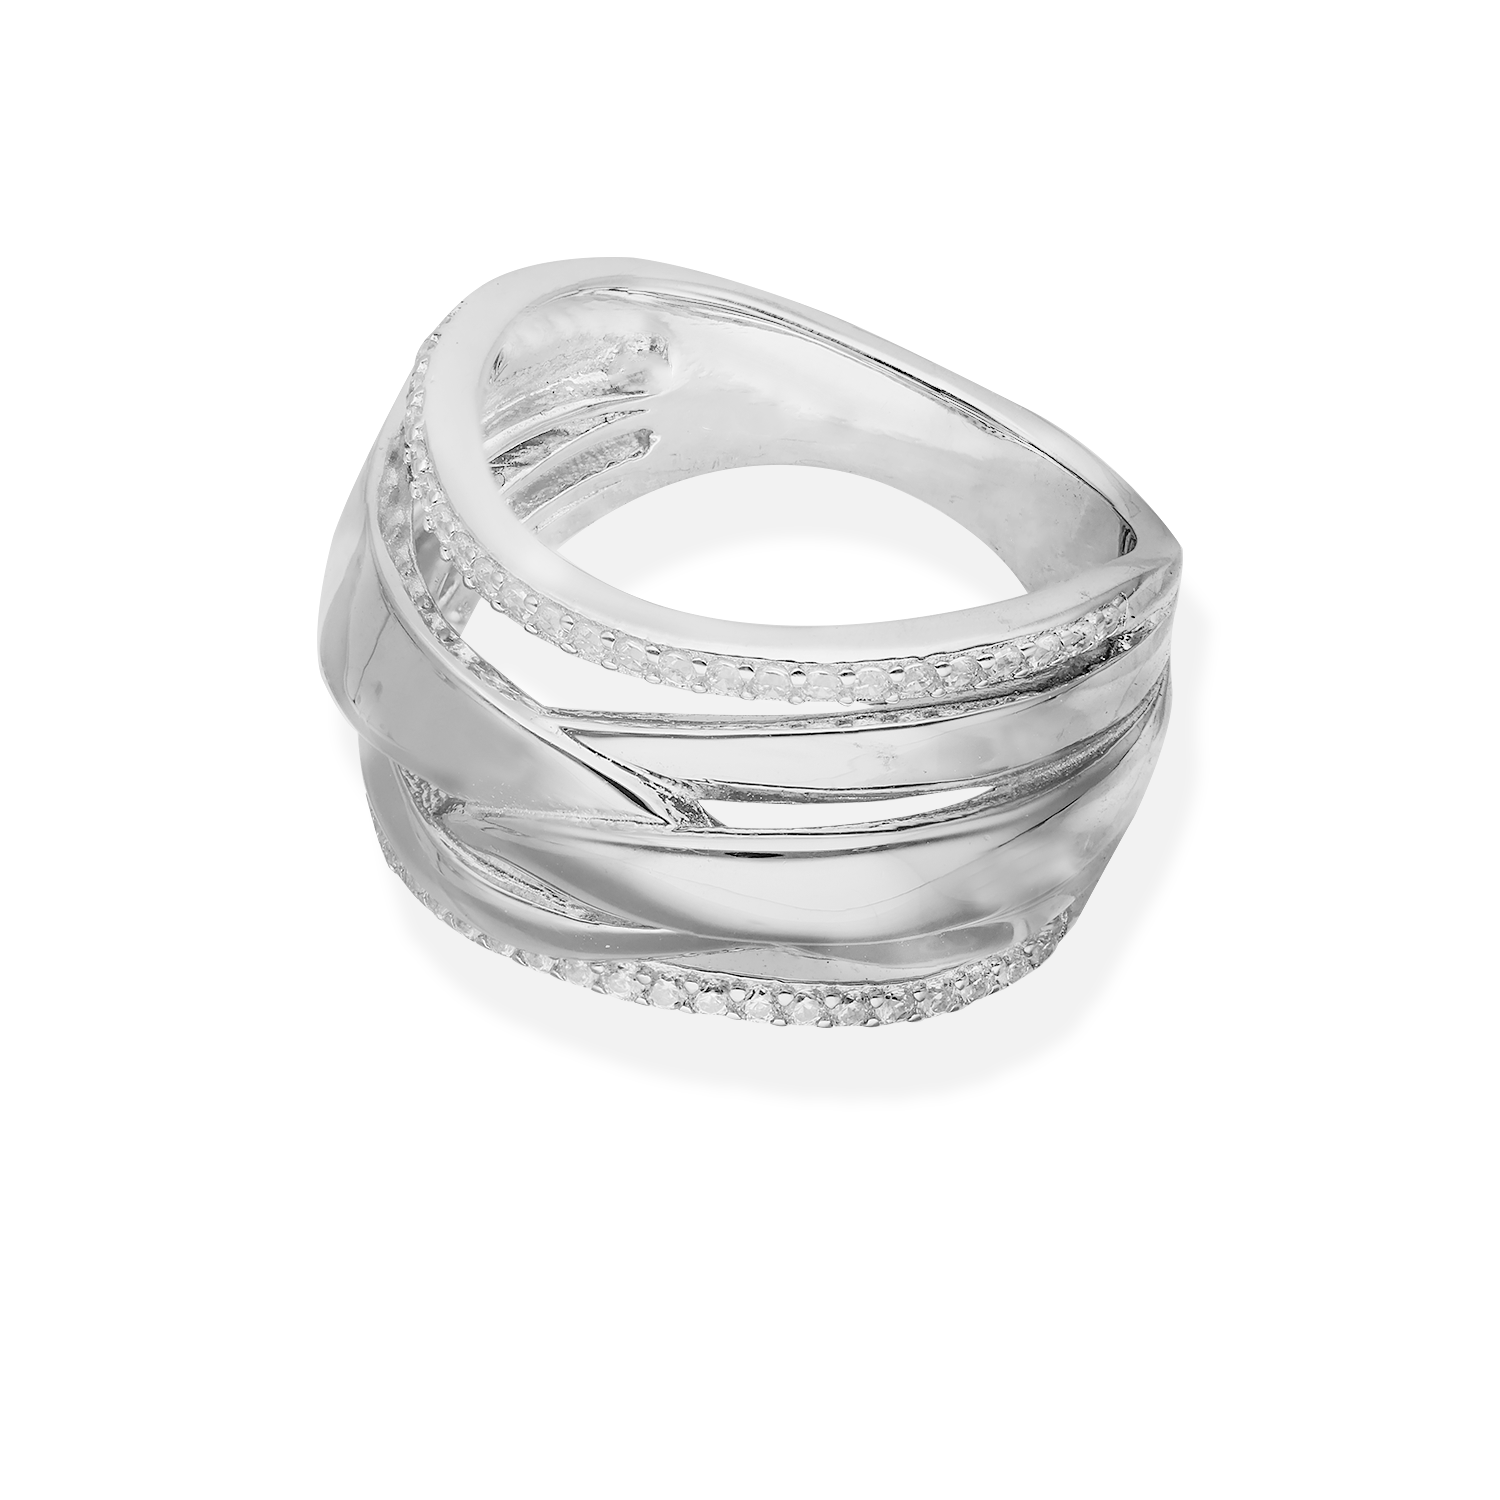 ABSTRACT STERLING SILVER RING | SKU: 0018326659, 0018663112